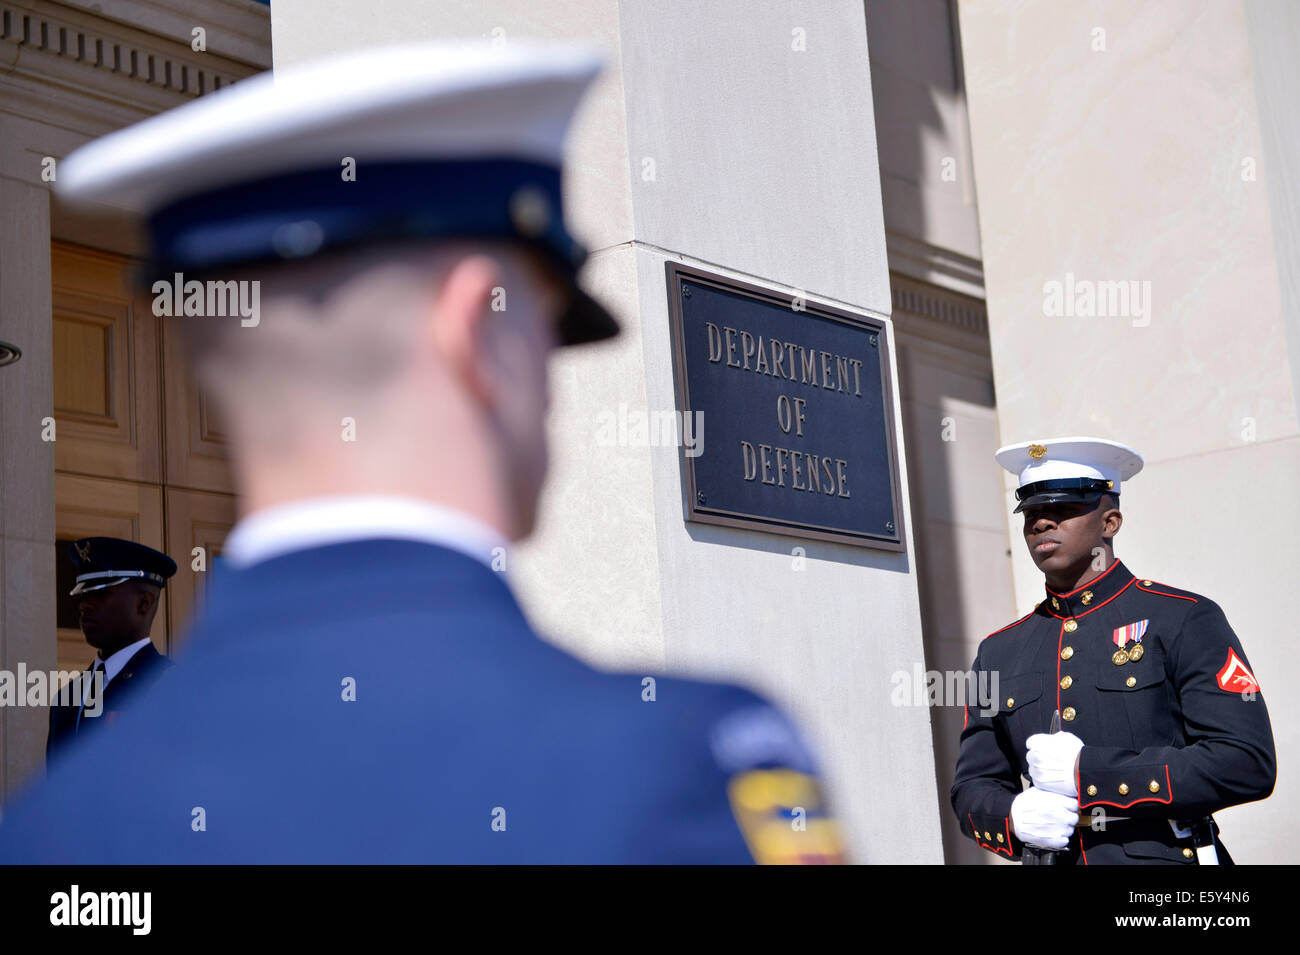 Washington, DC, USA. 31st Mar, 2014. File photo taken on March 31, 2014 shows soldiers of honor guard attending a ceremony at the Pentagon, Washington, DC, capital of the United States. The U.S. military said Friday it has launched targeted airstrikes on the Islamic State of Iraq and the Levant (ISIL) militants in north Iraq by dropping two laser-guided bombs on their mobile artillery. © Yin Bogu/Xinhua/Alamy Live News Stock Photo